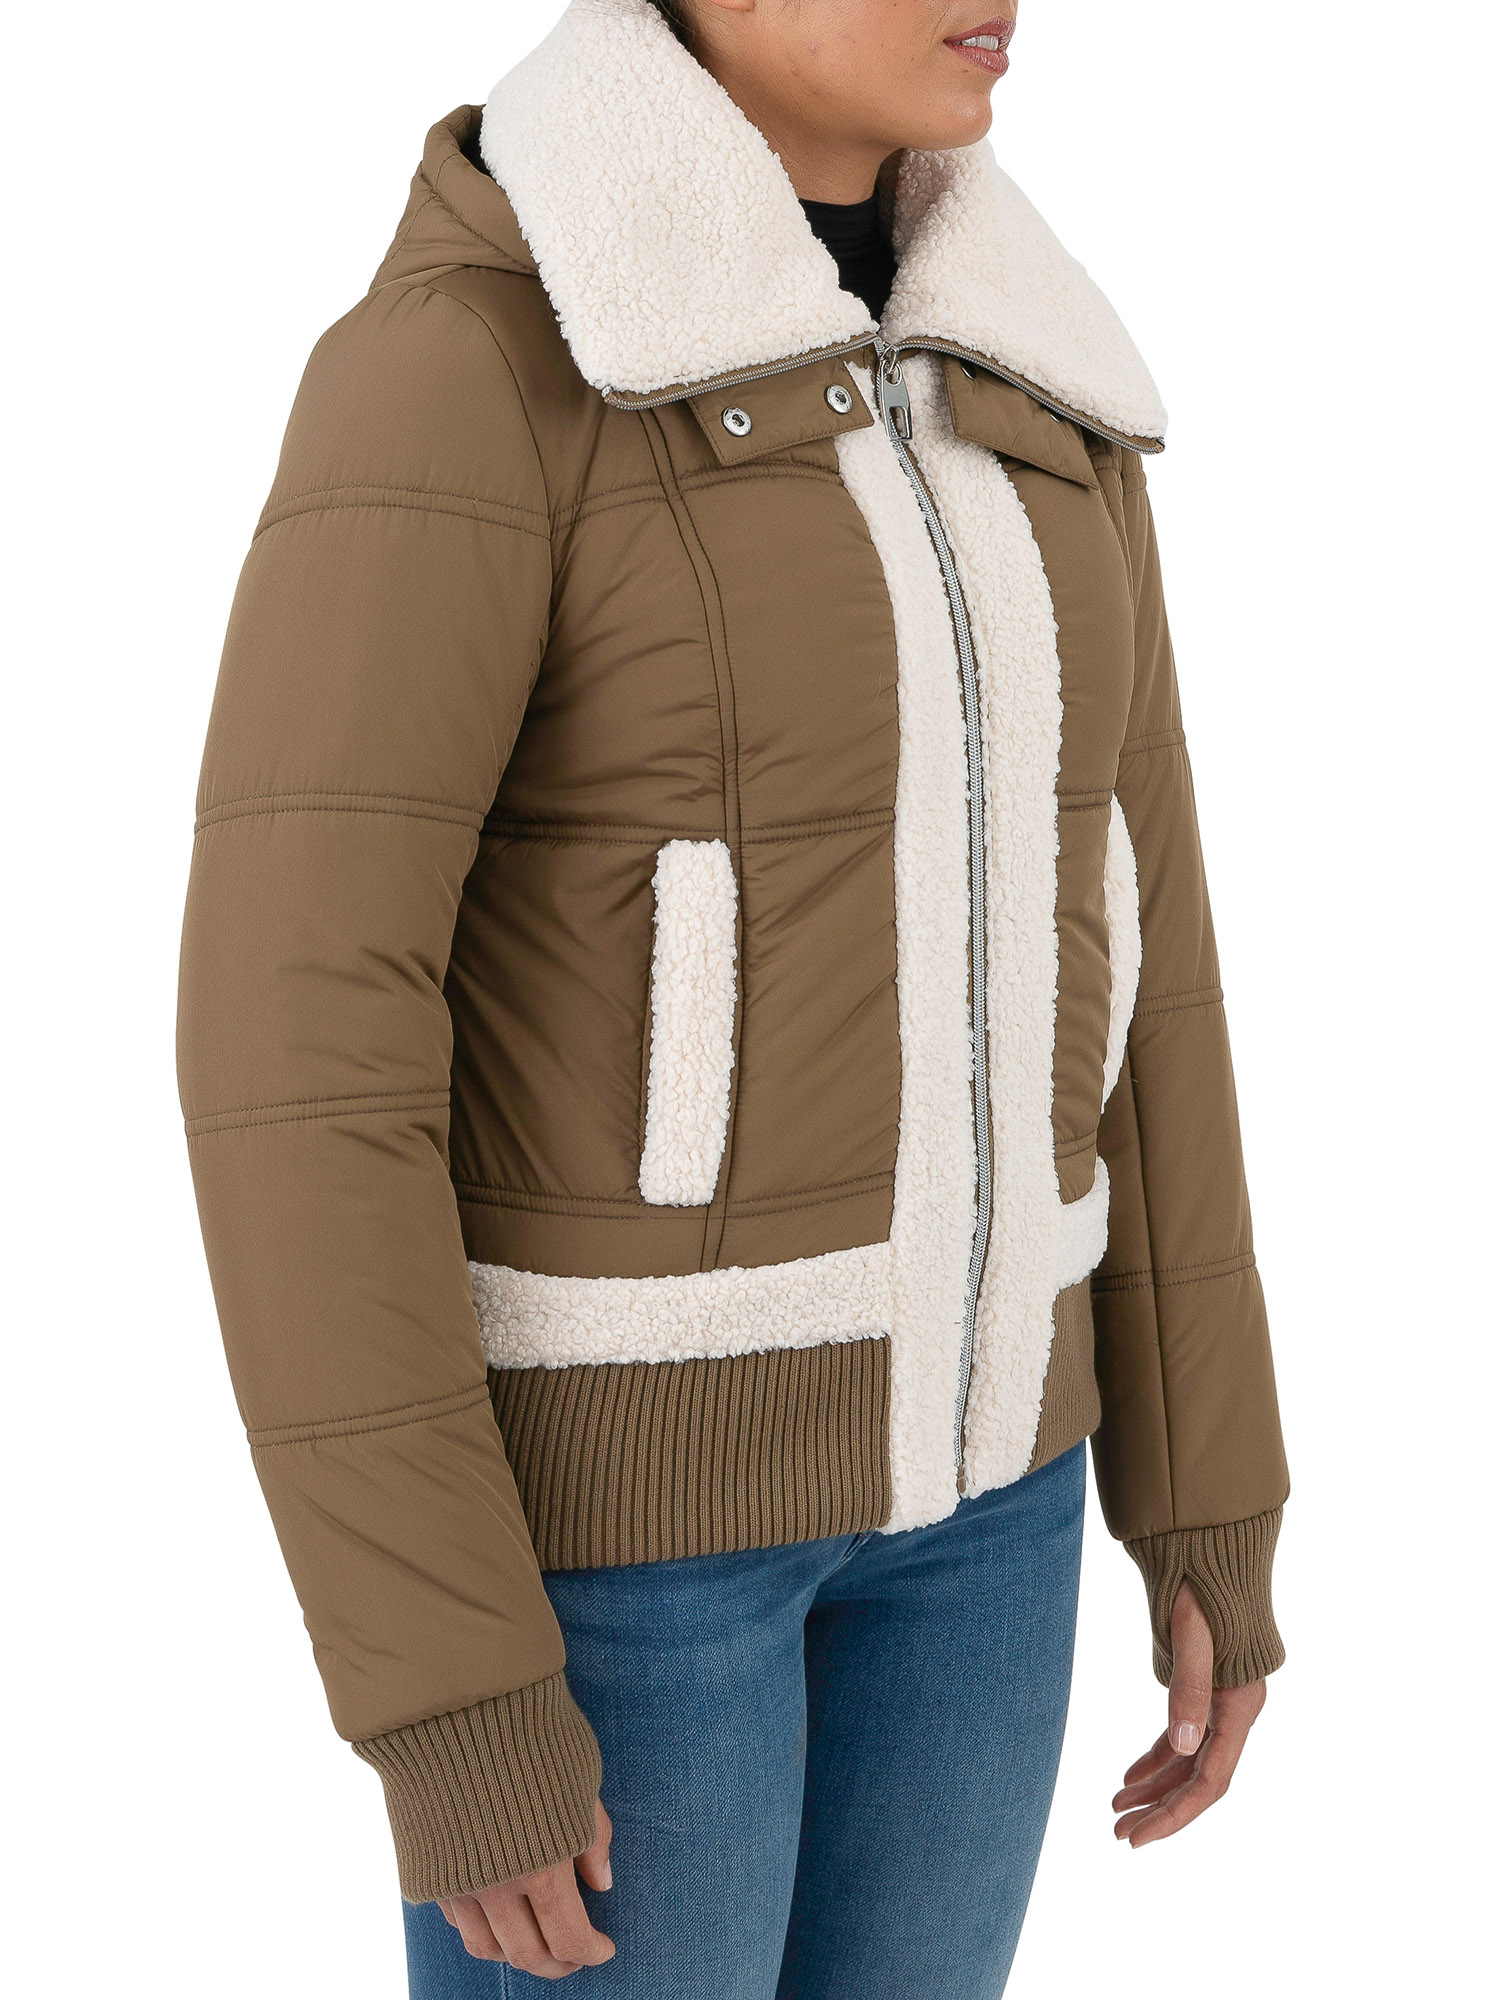 Cyn & Luca Women's Sustainable Bomber Jacket with Sherpa Trim - image 4 of 6